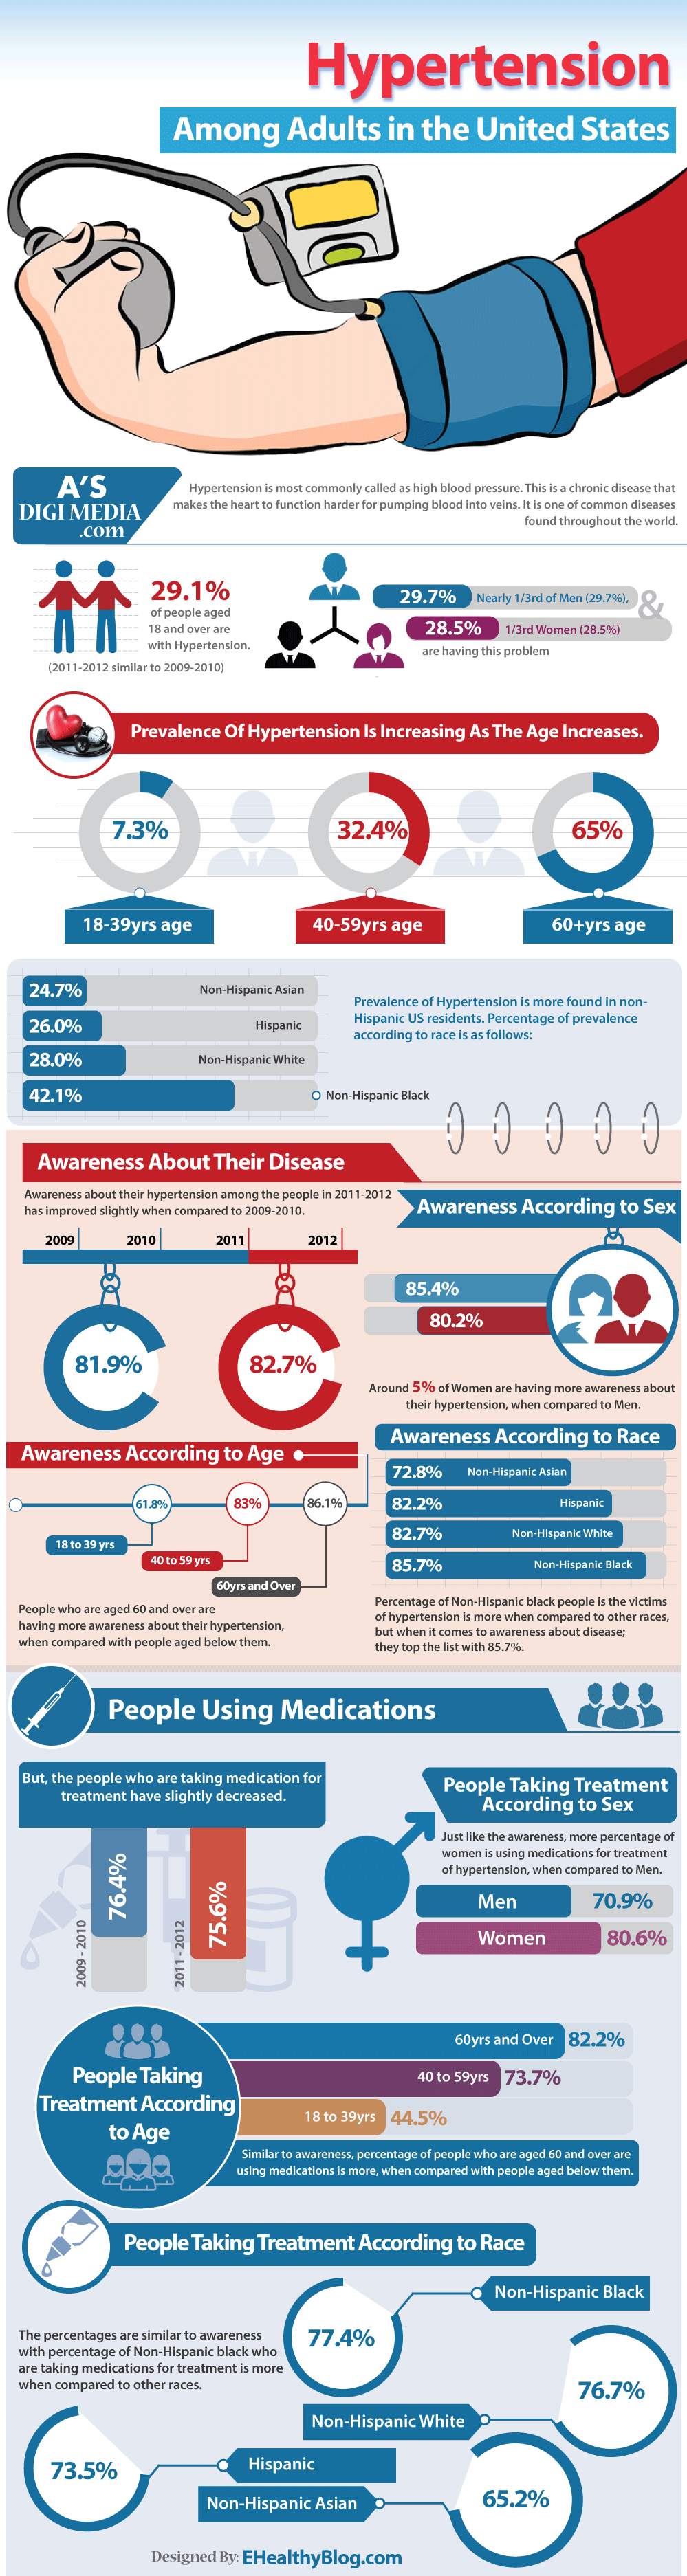 Hypertension Among Adults in the United States